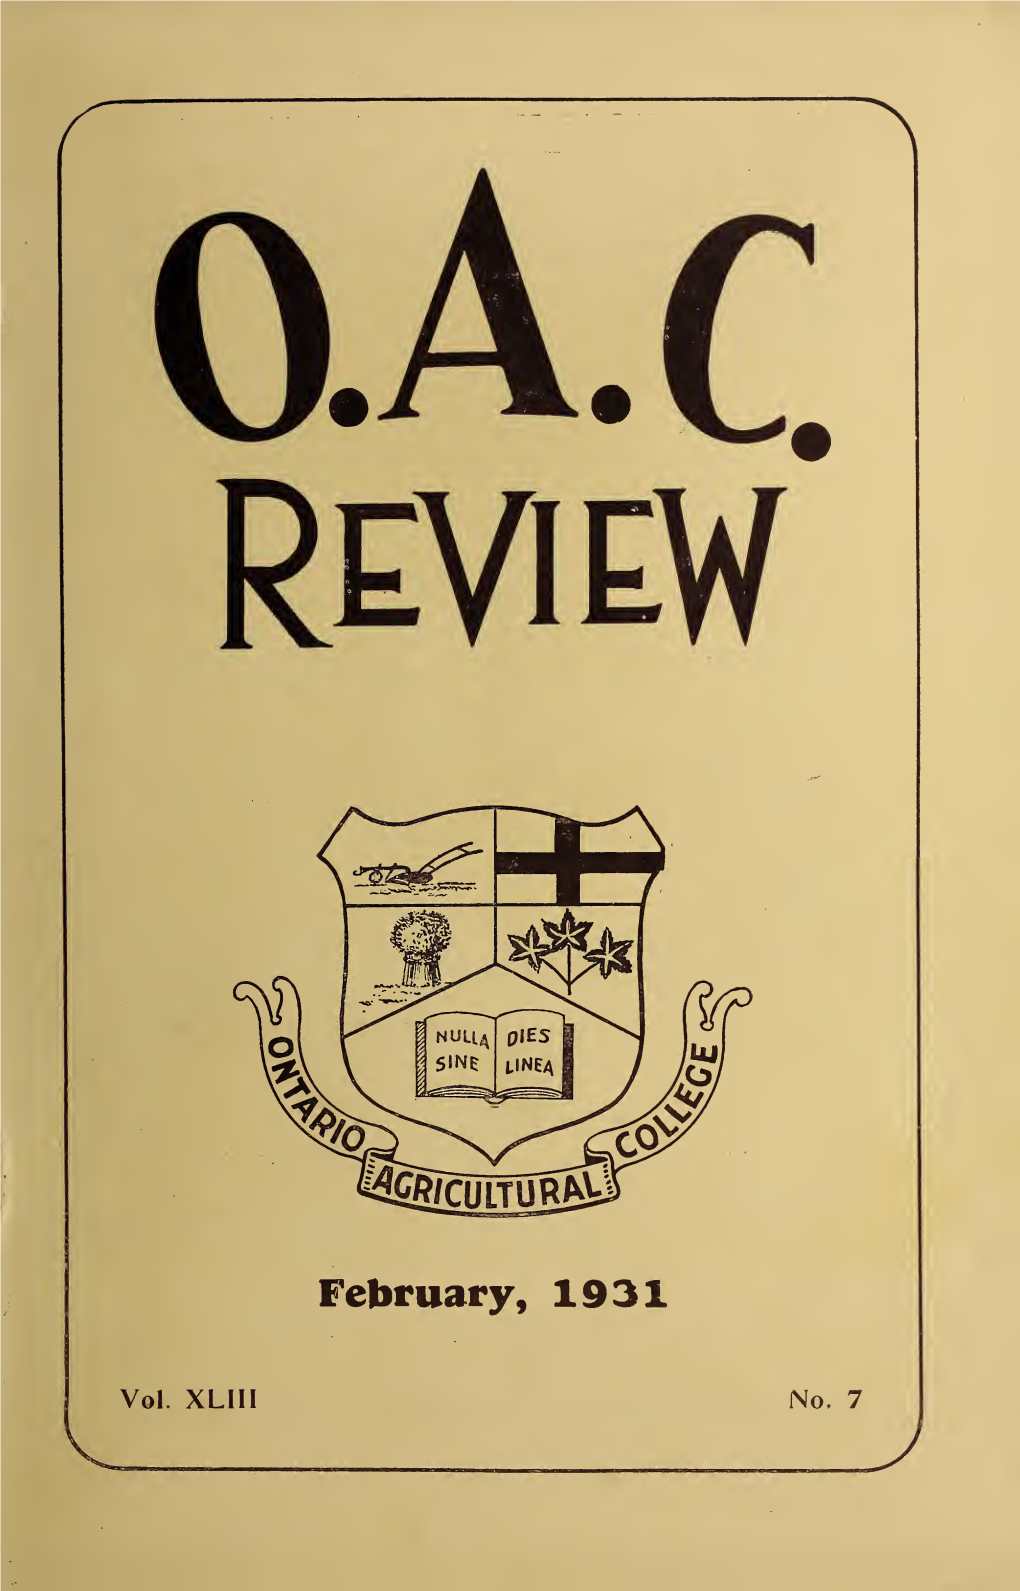 OAC Review Volume 43 Issue 7, February 1931